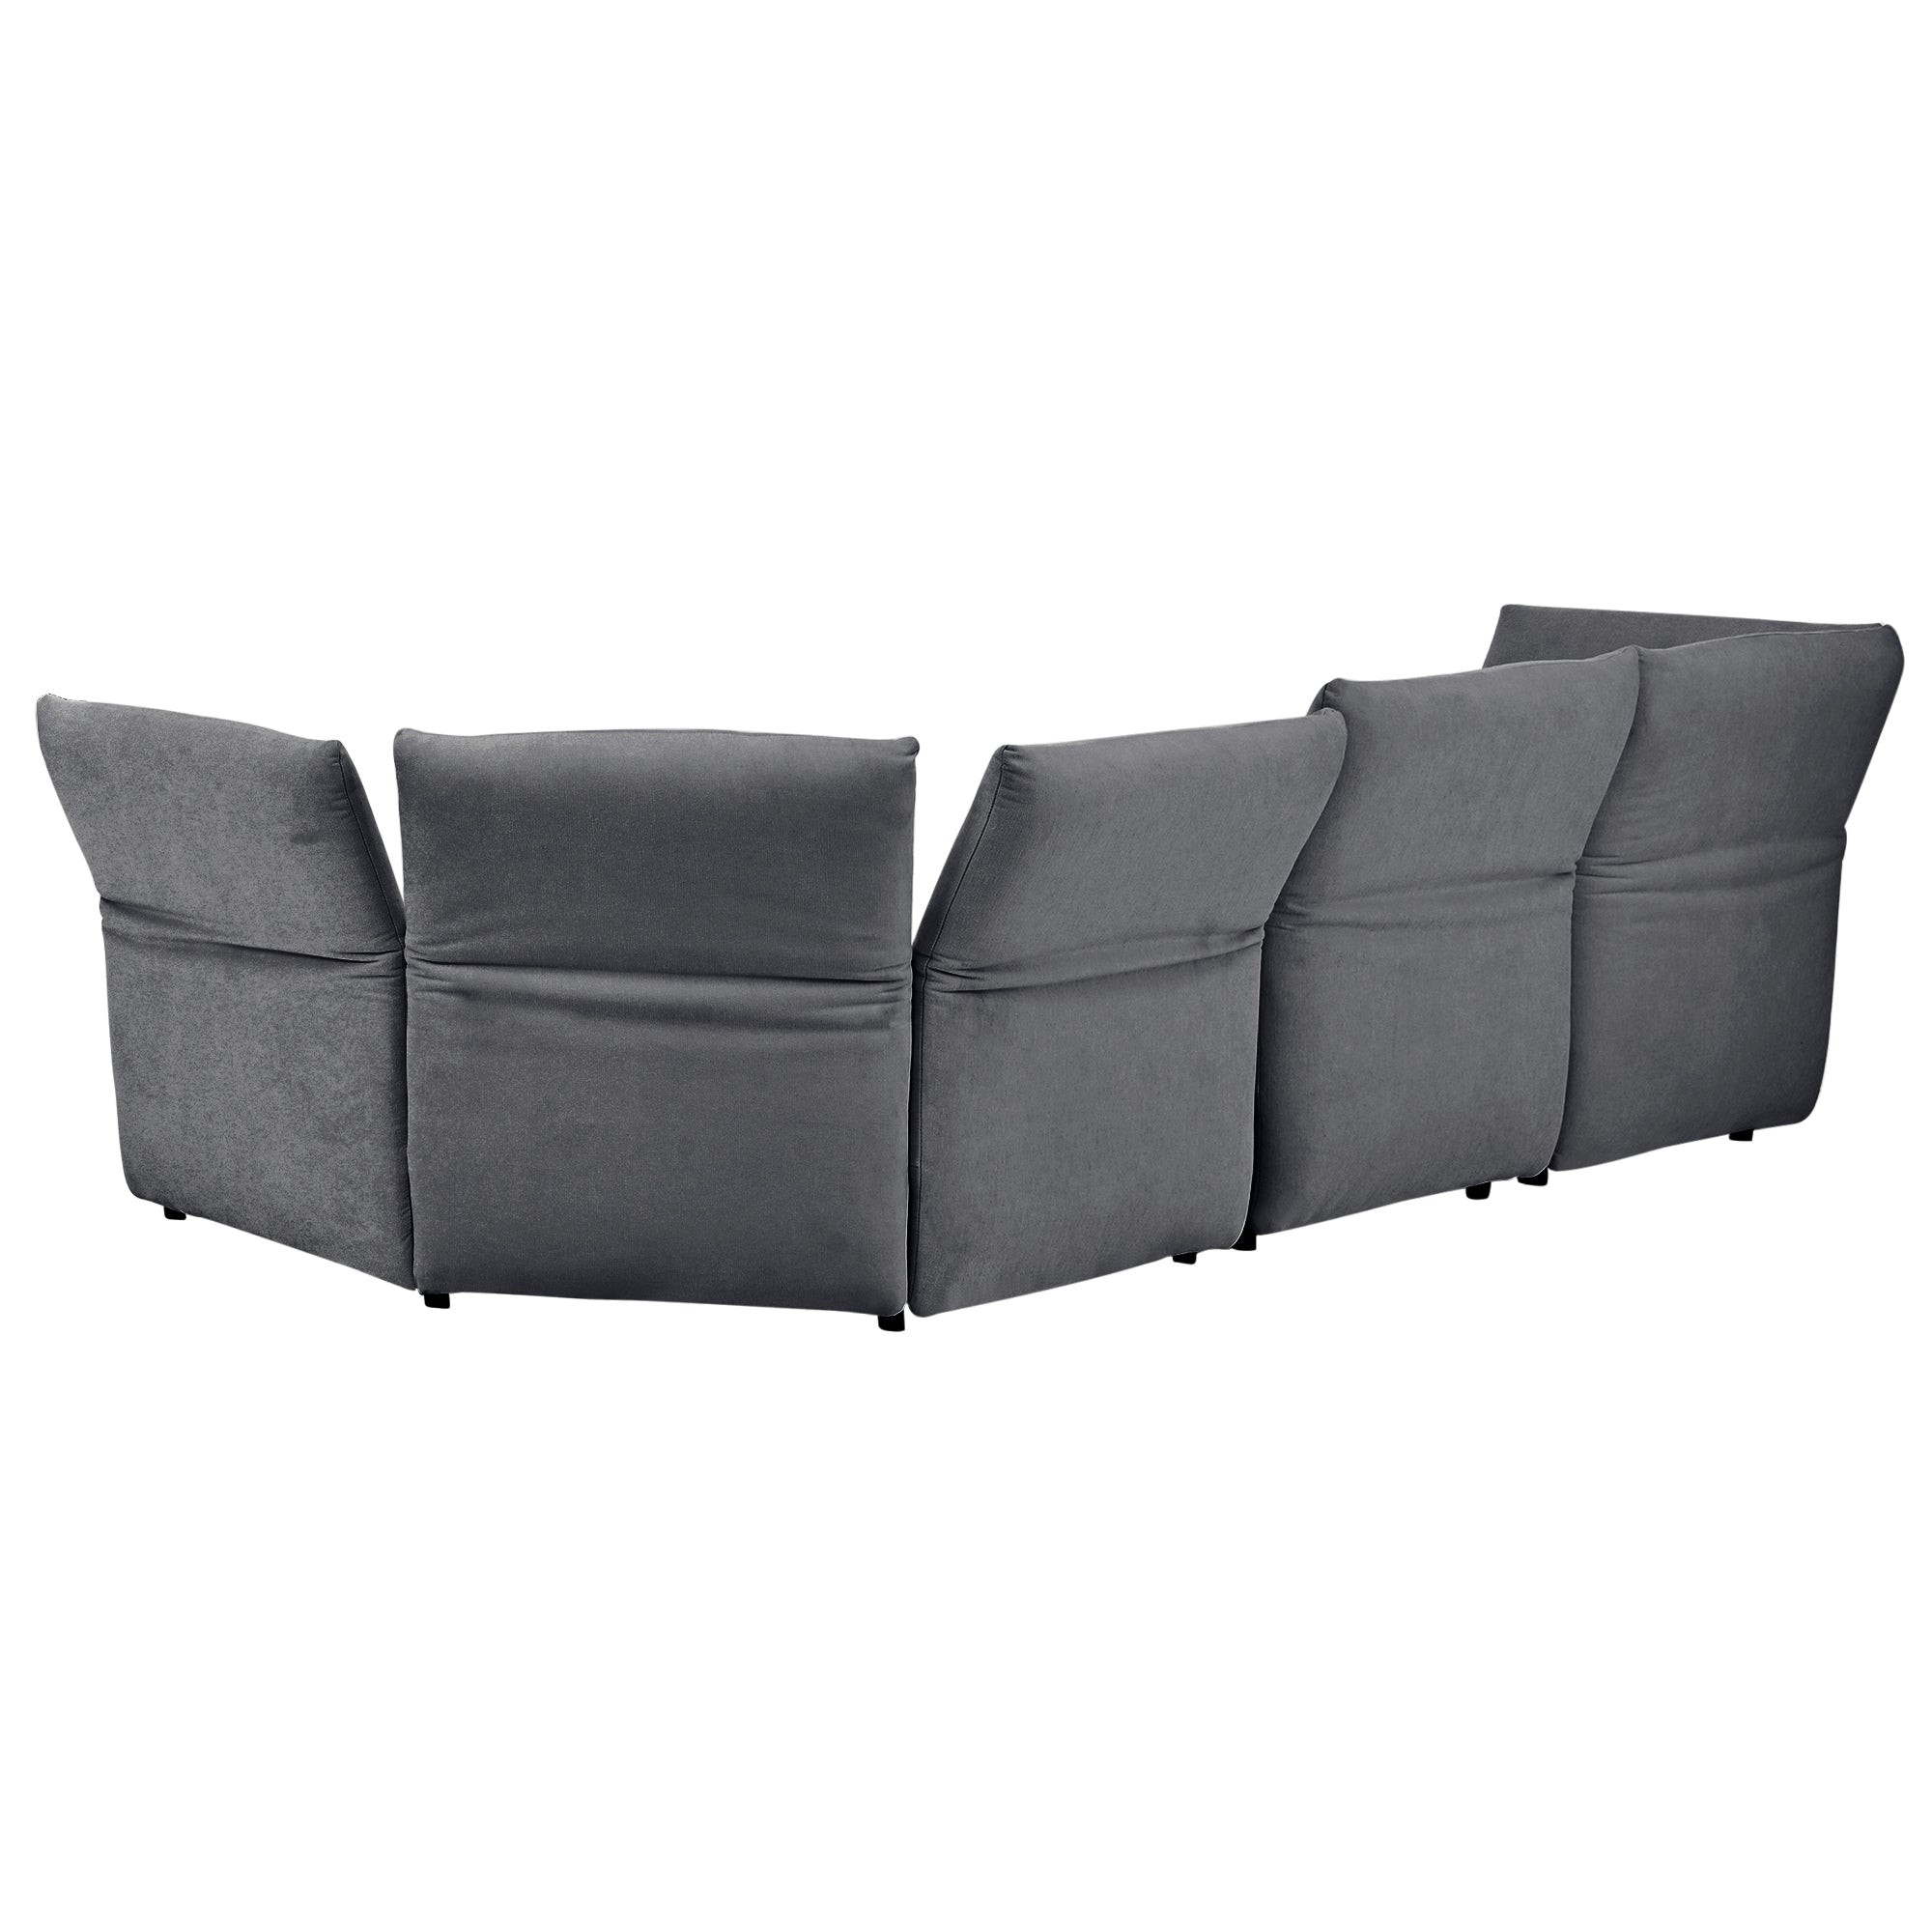 Stylish Sofa Set with Polyester Upholstery with Adjustable Back with Free Combination for Living Room - Gray